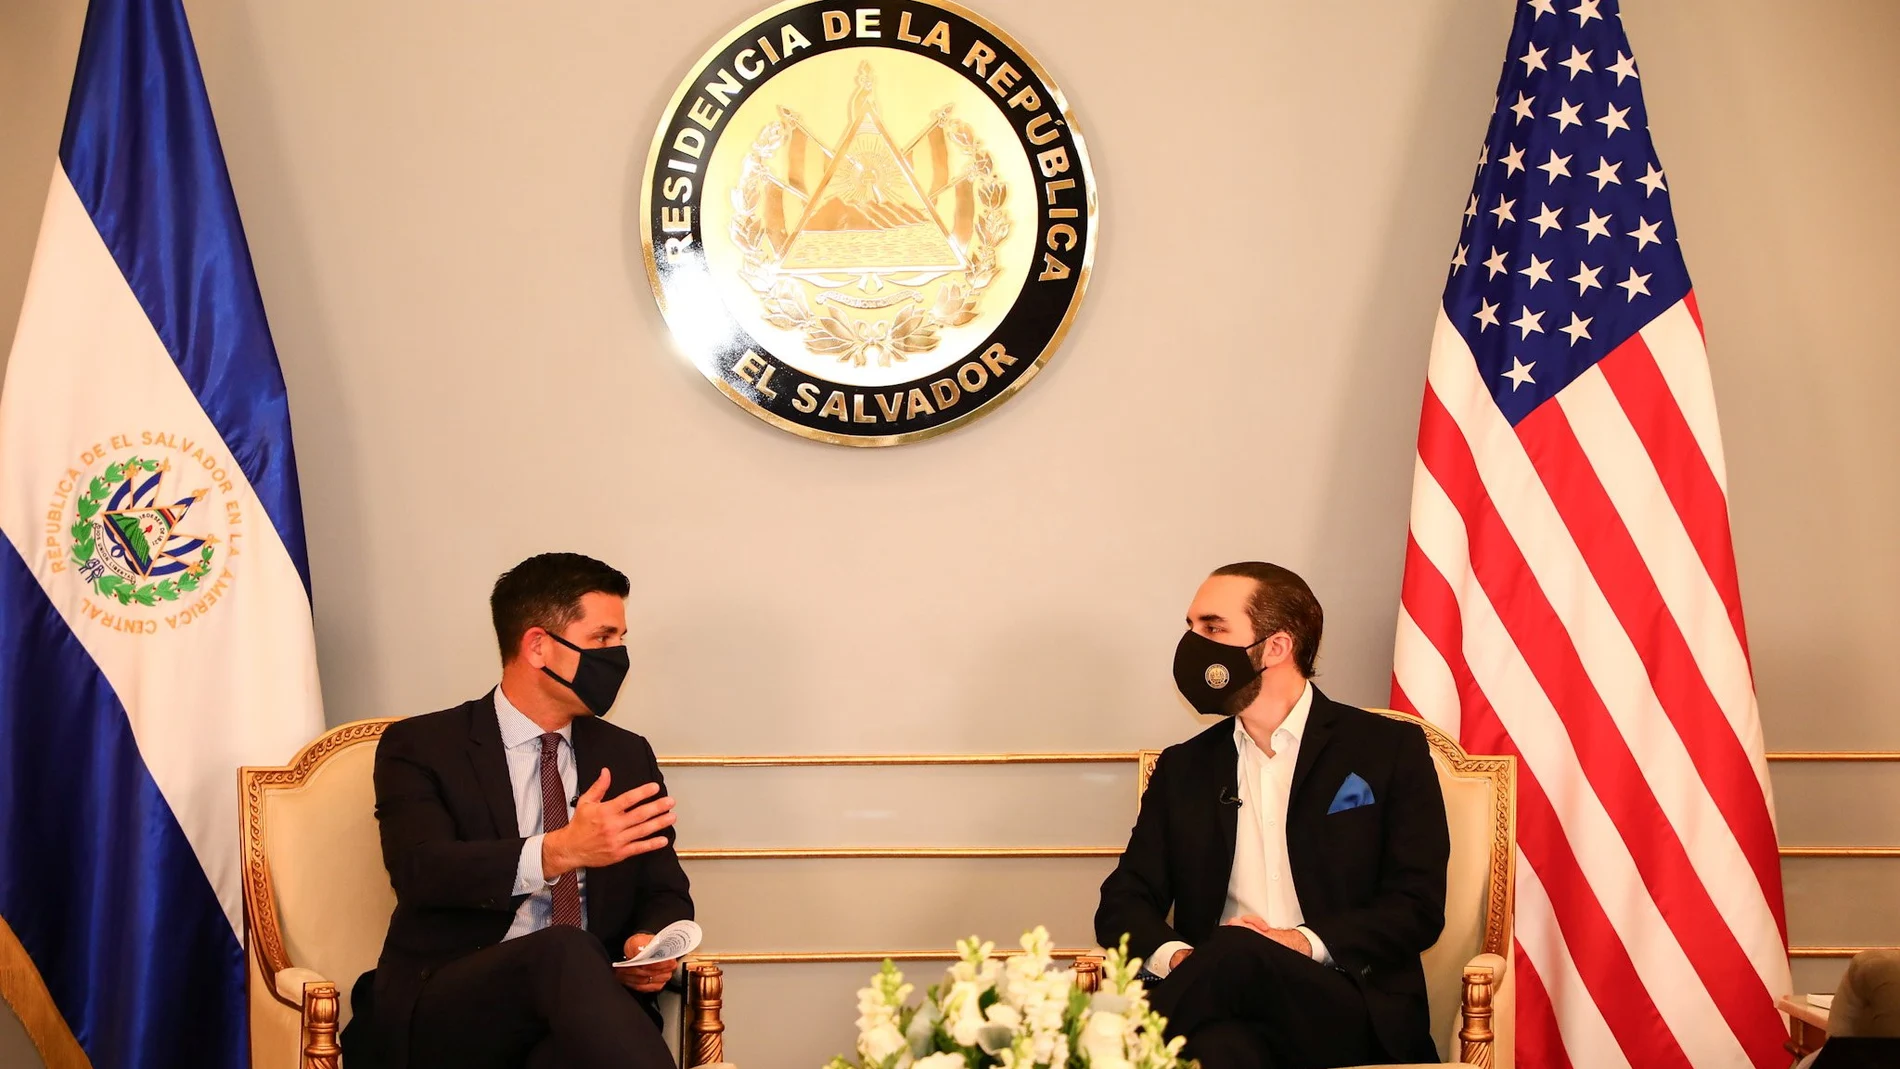 Acting U.S. Secretary of Homeland Security Chad Wolf talks to President of El Salvador Nayib Bukele during a meeting at the Presidential House, in San Salvador, El Salvador December 15, 2020. El Salvador's Presidency/Handout via REUTERS ATTENTION EDITORS - THIS IMAGE HAS BEEN SUPPLIED BY A THIRD PARTY. NO RESALES. NO ARCHIVES